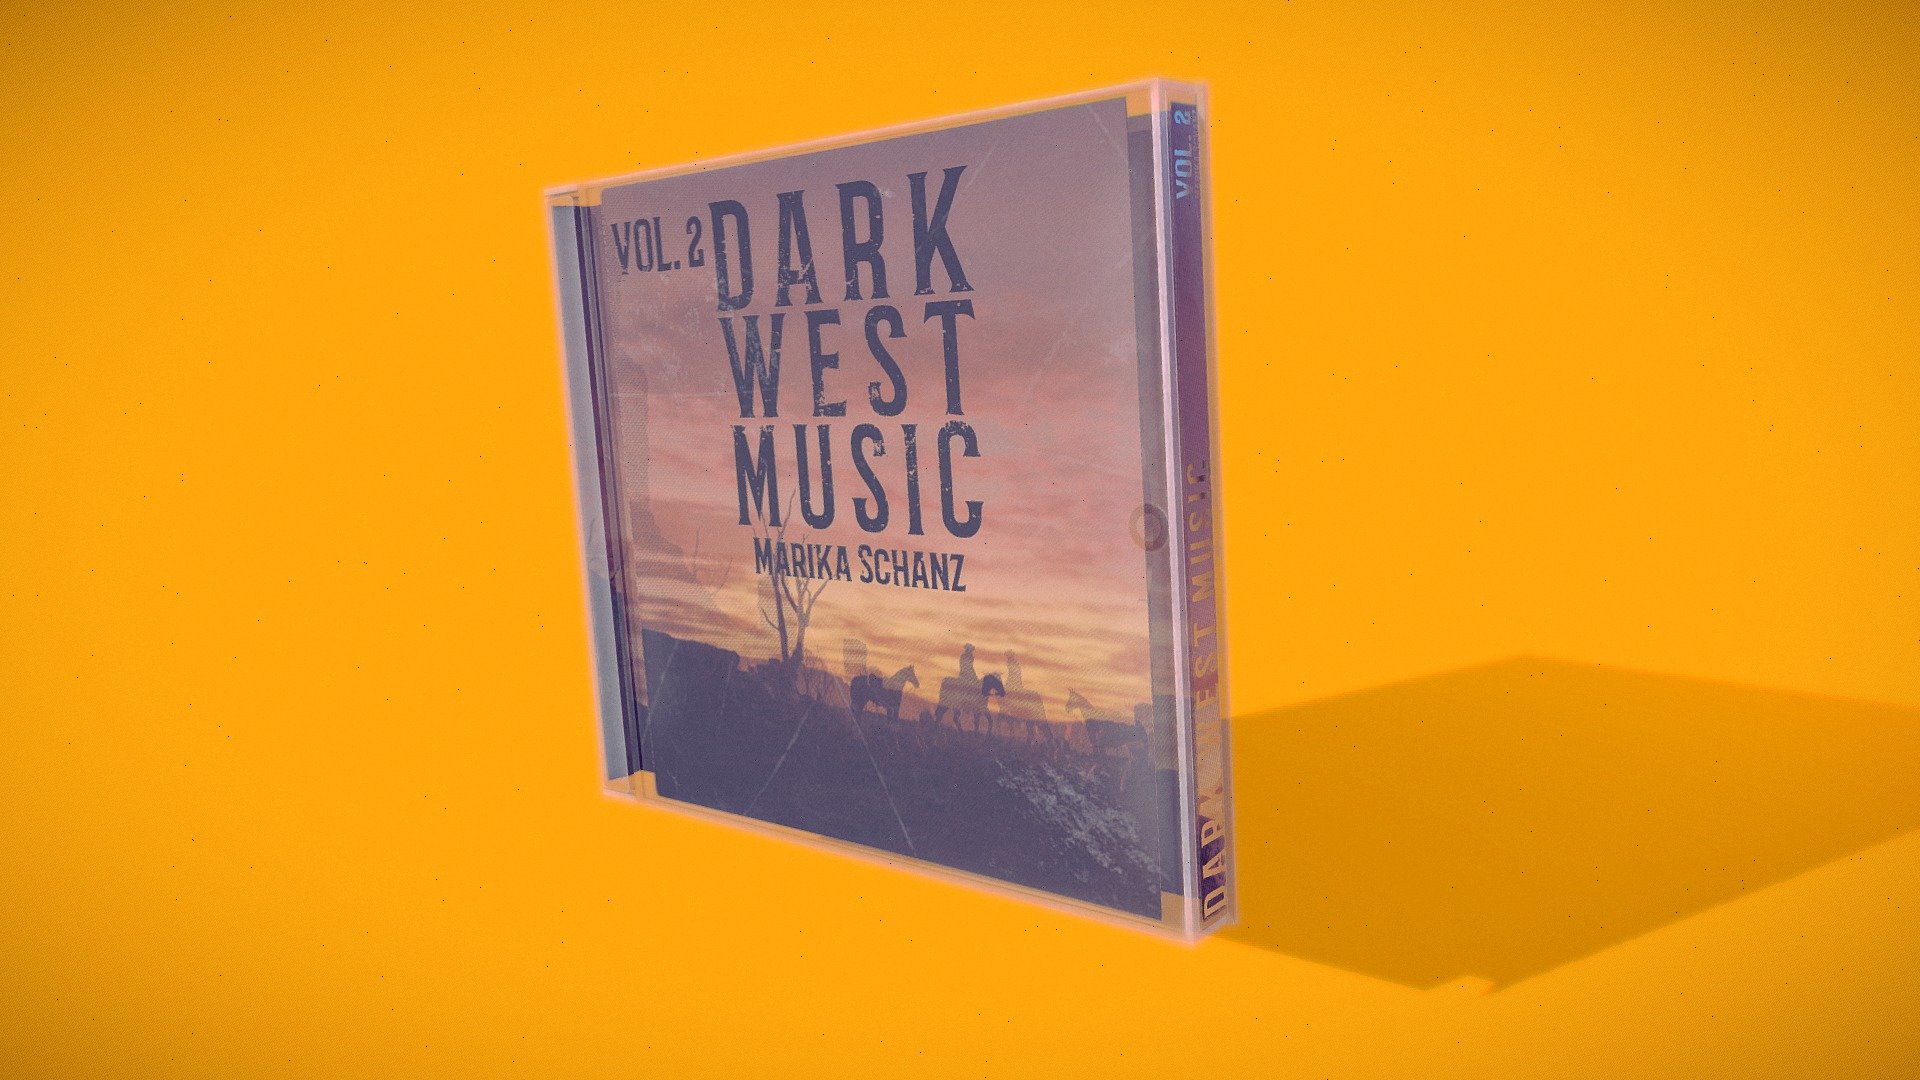 Transparent plastic cd case with disc and printed paper

The music to this album:

Youtube https://www.youtube.com/watch?v=X68gn7qIaNc

Unreal Marketplace https://www.unrealengine.com/marketplace/en-US/product/6969168a7c714c53a69ebbf4ee935293

Soundcloud https://soundcloud.com/marika-schanz/sets/wild-west-2

modeled in 3DS Max, textured in Substance Painter
10/2022 - CD case - Buy Royalty Free 3D model by Marcel Schanz (@mschanz) 3d model